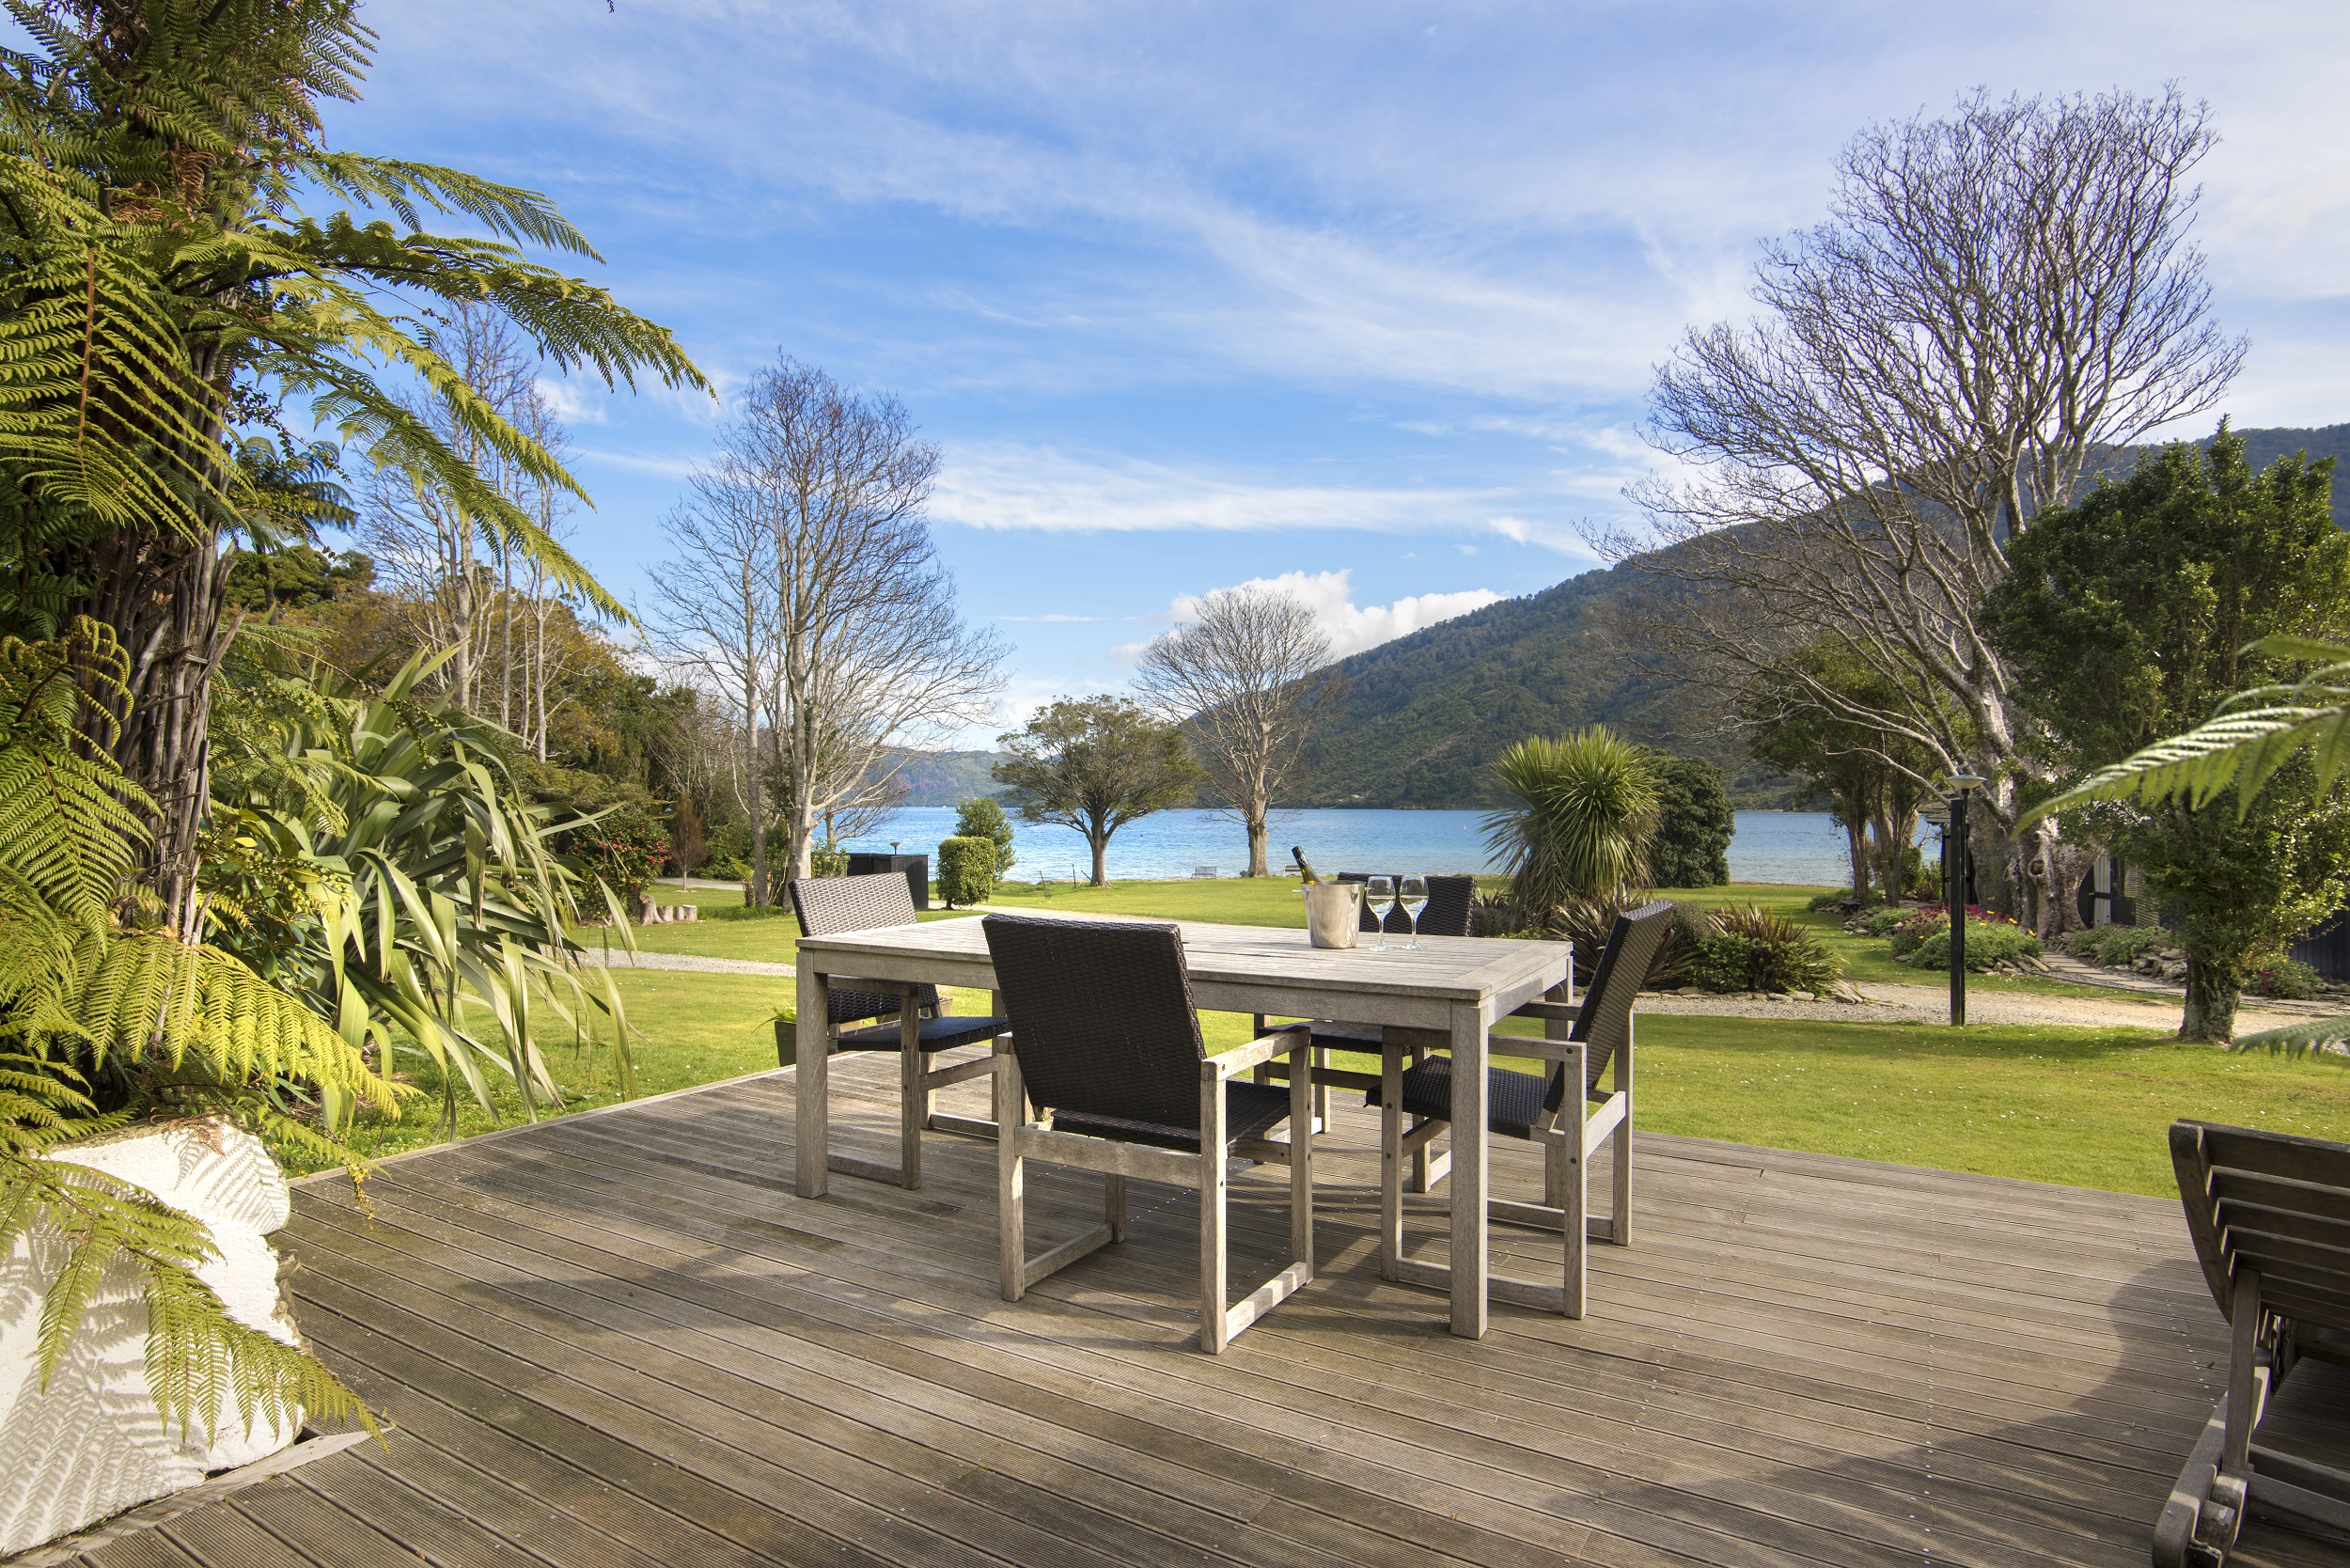 The view from a Cook's Cottage at Furneaux Lodge overlooks the furnished outdoor deck, sweeping green lawn and Endeavour Inlet in the Marlborough Sounds, New Zealand